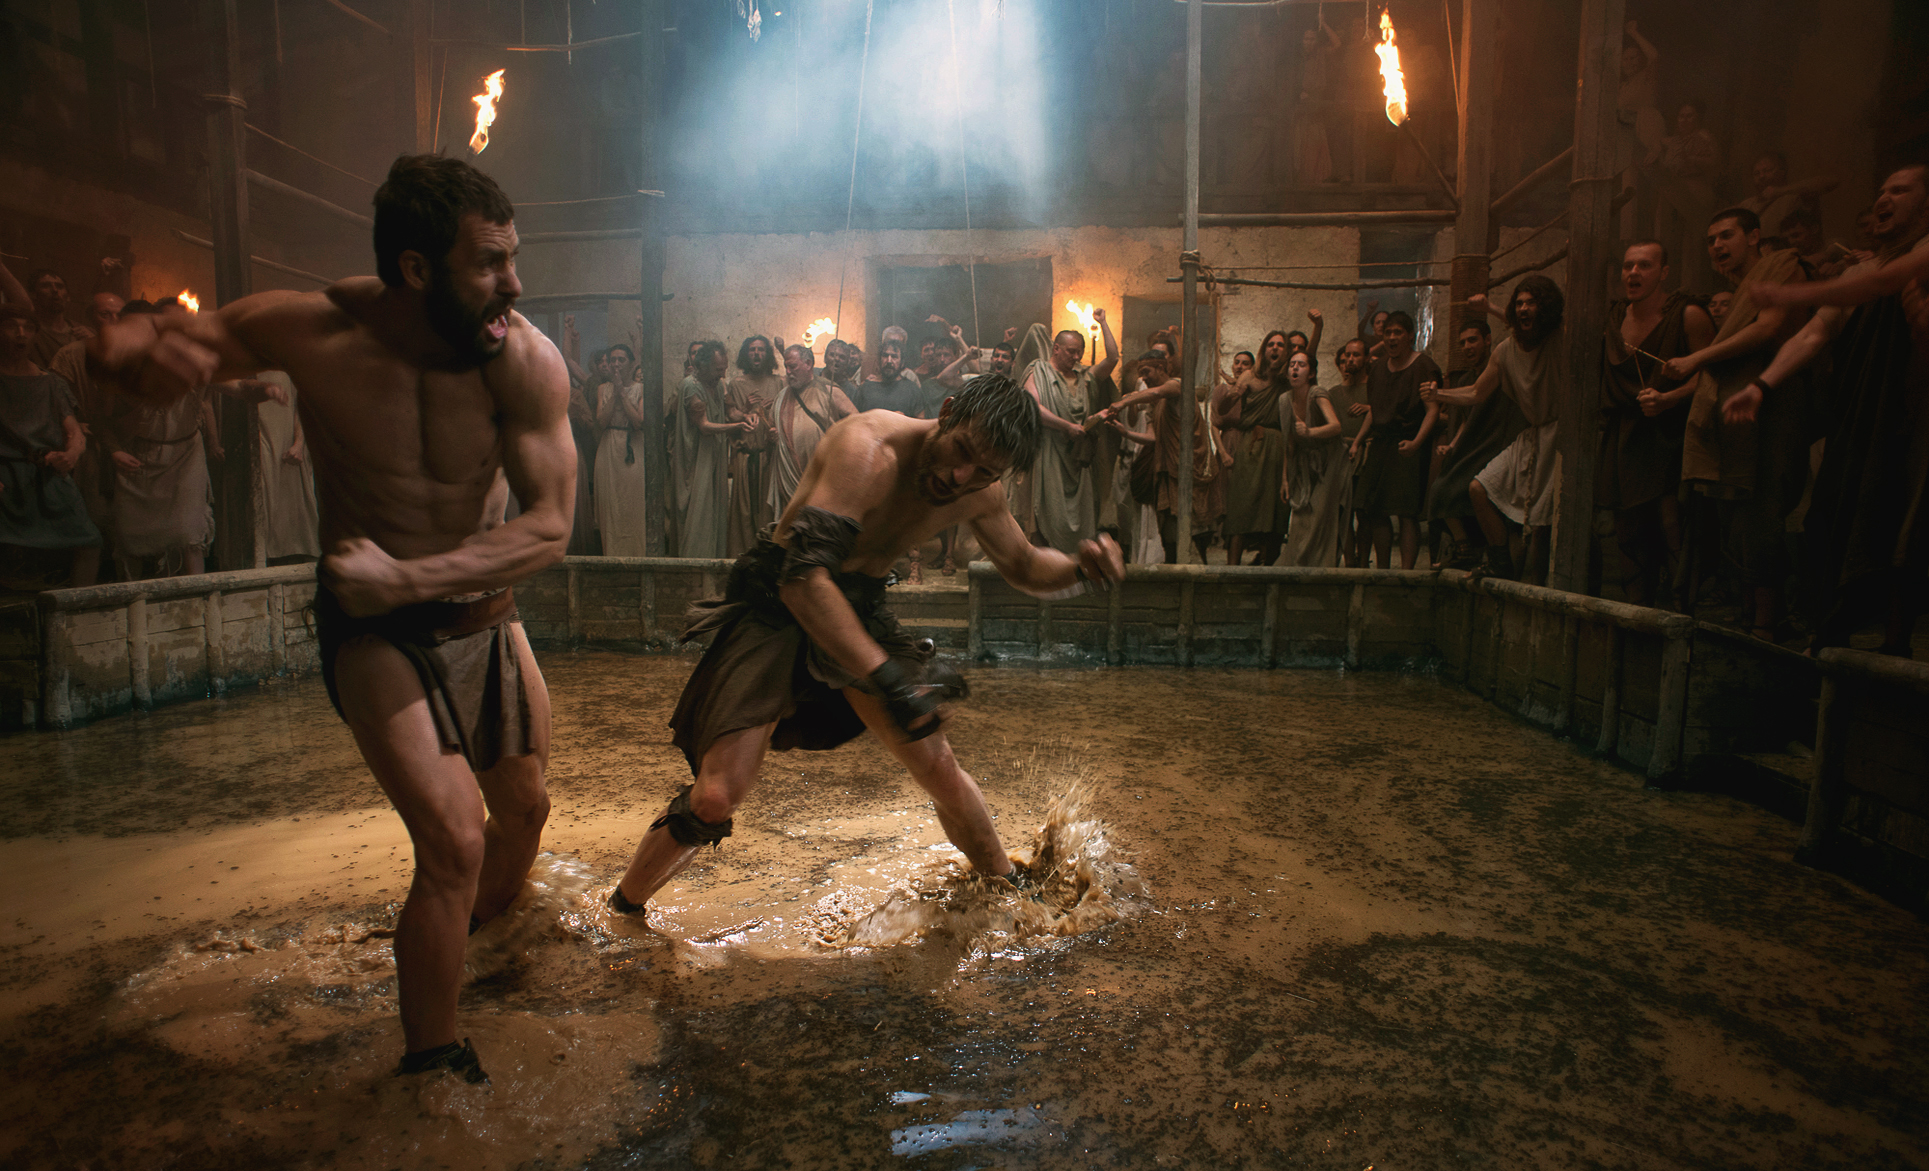 THE LEGEND OF HERCULES - Directed by Renny Harlin - Production Design by Luca Tranchino - Mud Pit Arena - ©2014 - Millennium Films